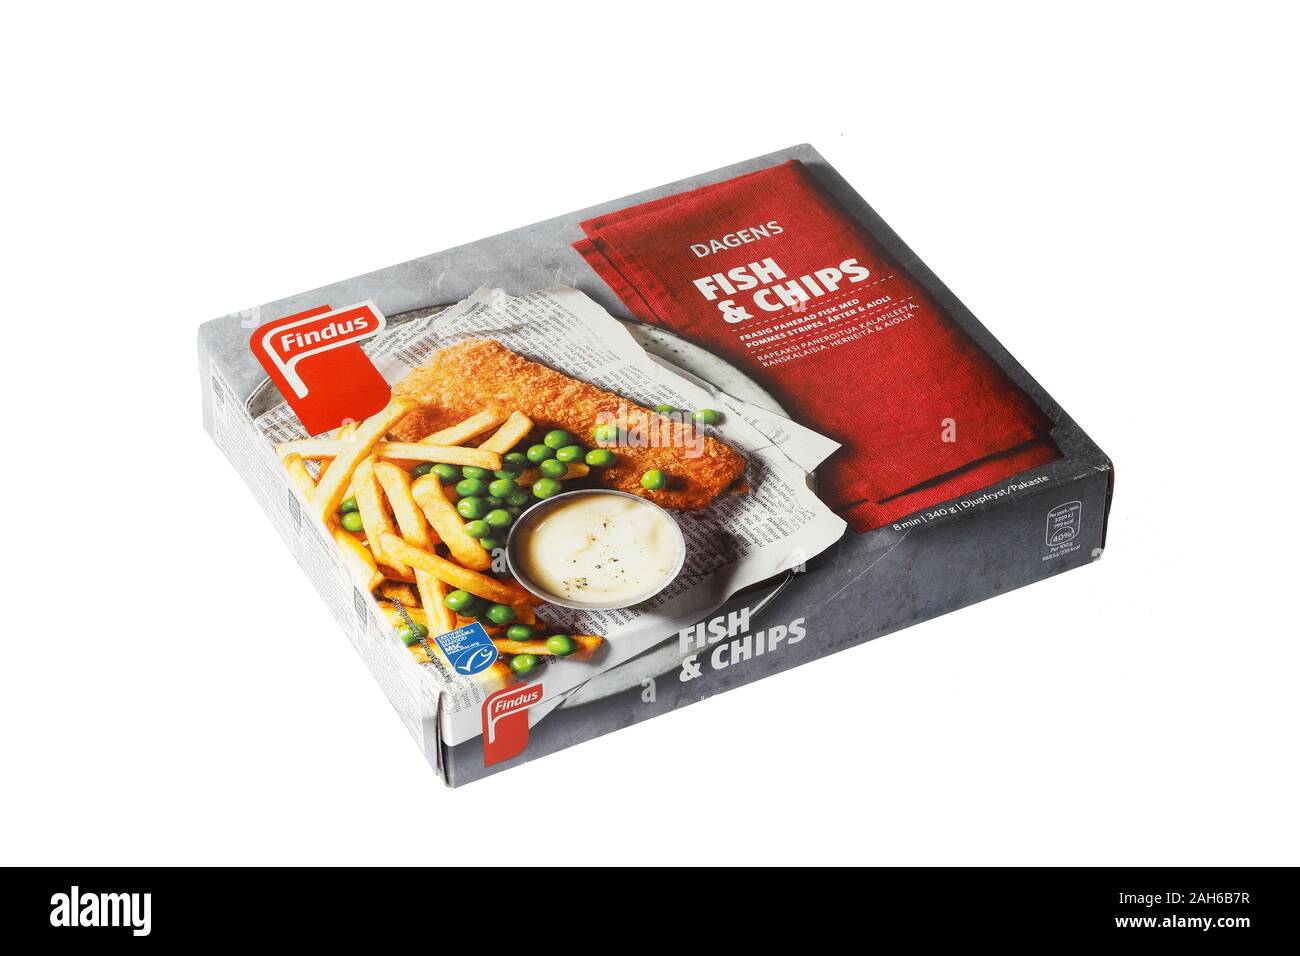 Stockholm, Sweden - December 12, 2019: One package of a frozen fish and chips ready meal produced by Findus for the Swedish market, isolated on white Stock Photo